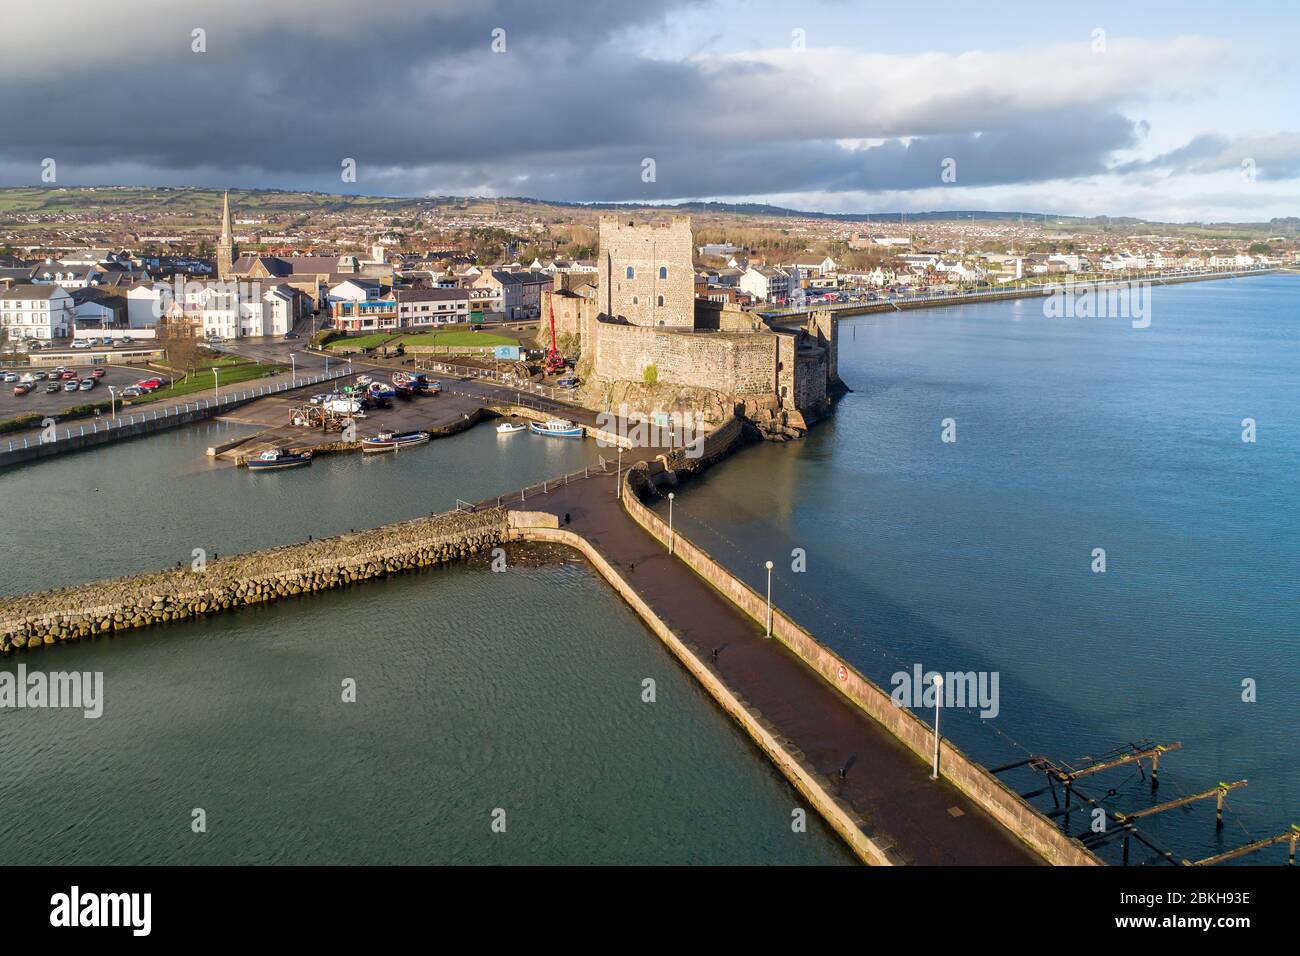 Medieval Norman Castle, harbor with boat ramp and wave breaker in Carrickfergus near Belfast, Northern Ireland, UK. Aerial view in sunset light Stock Photo